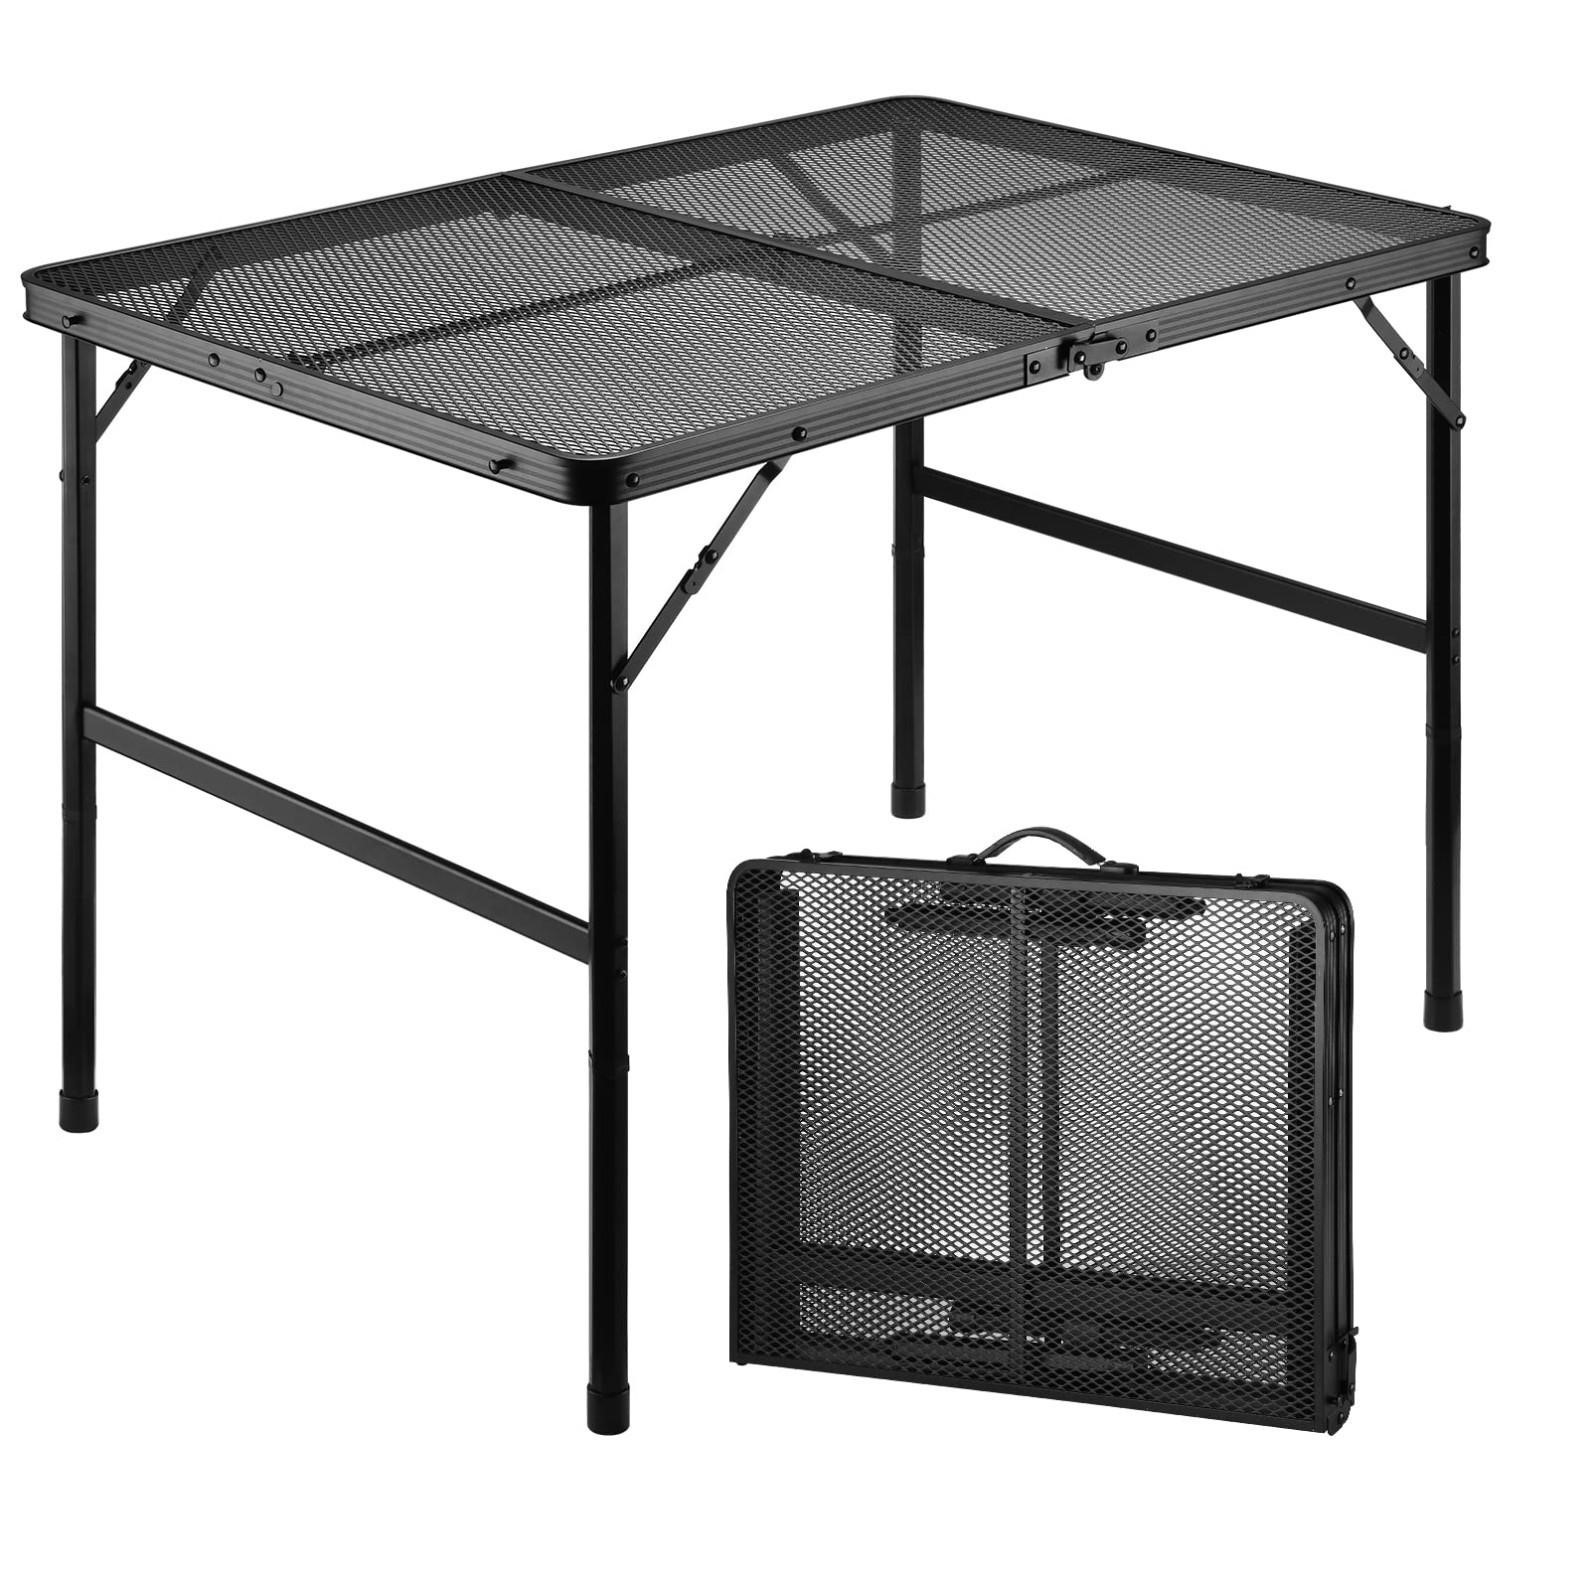 JOFTIX Camping Table, 3 ft Folding Grill Table wit